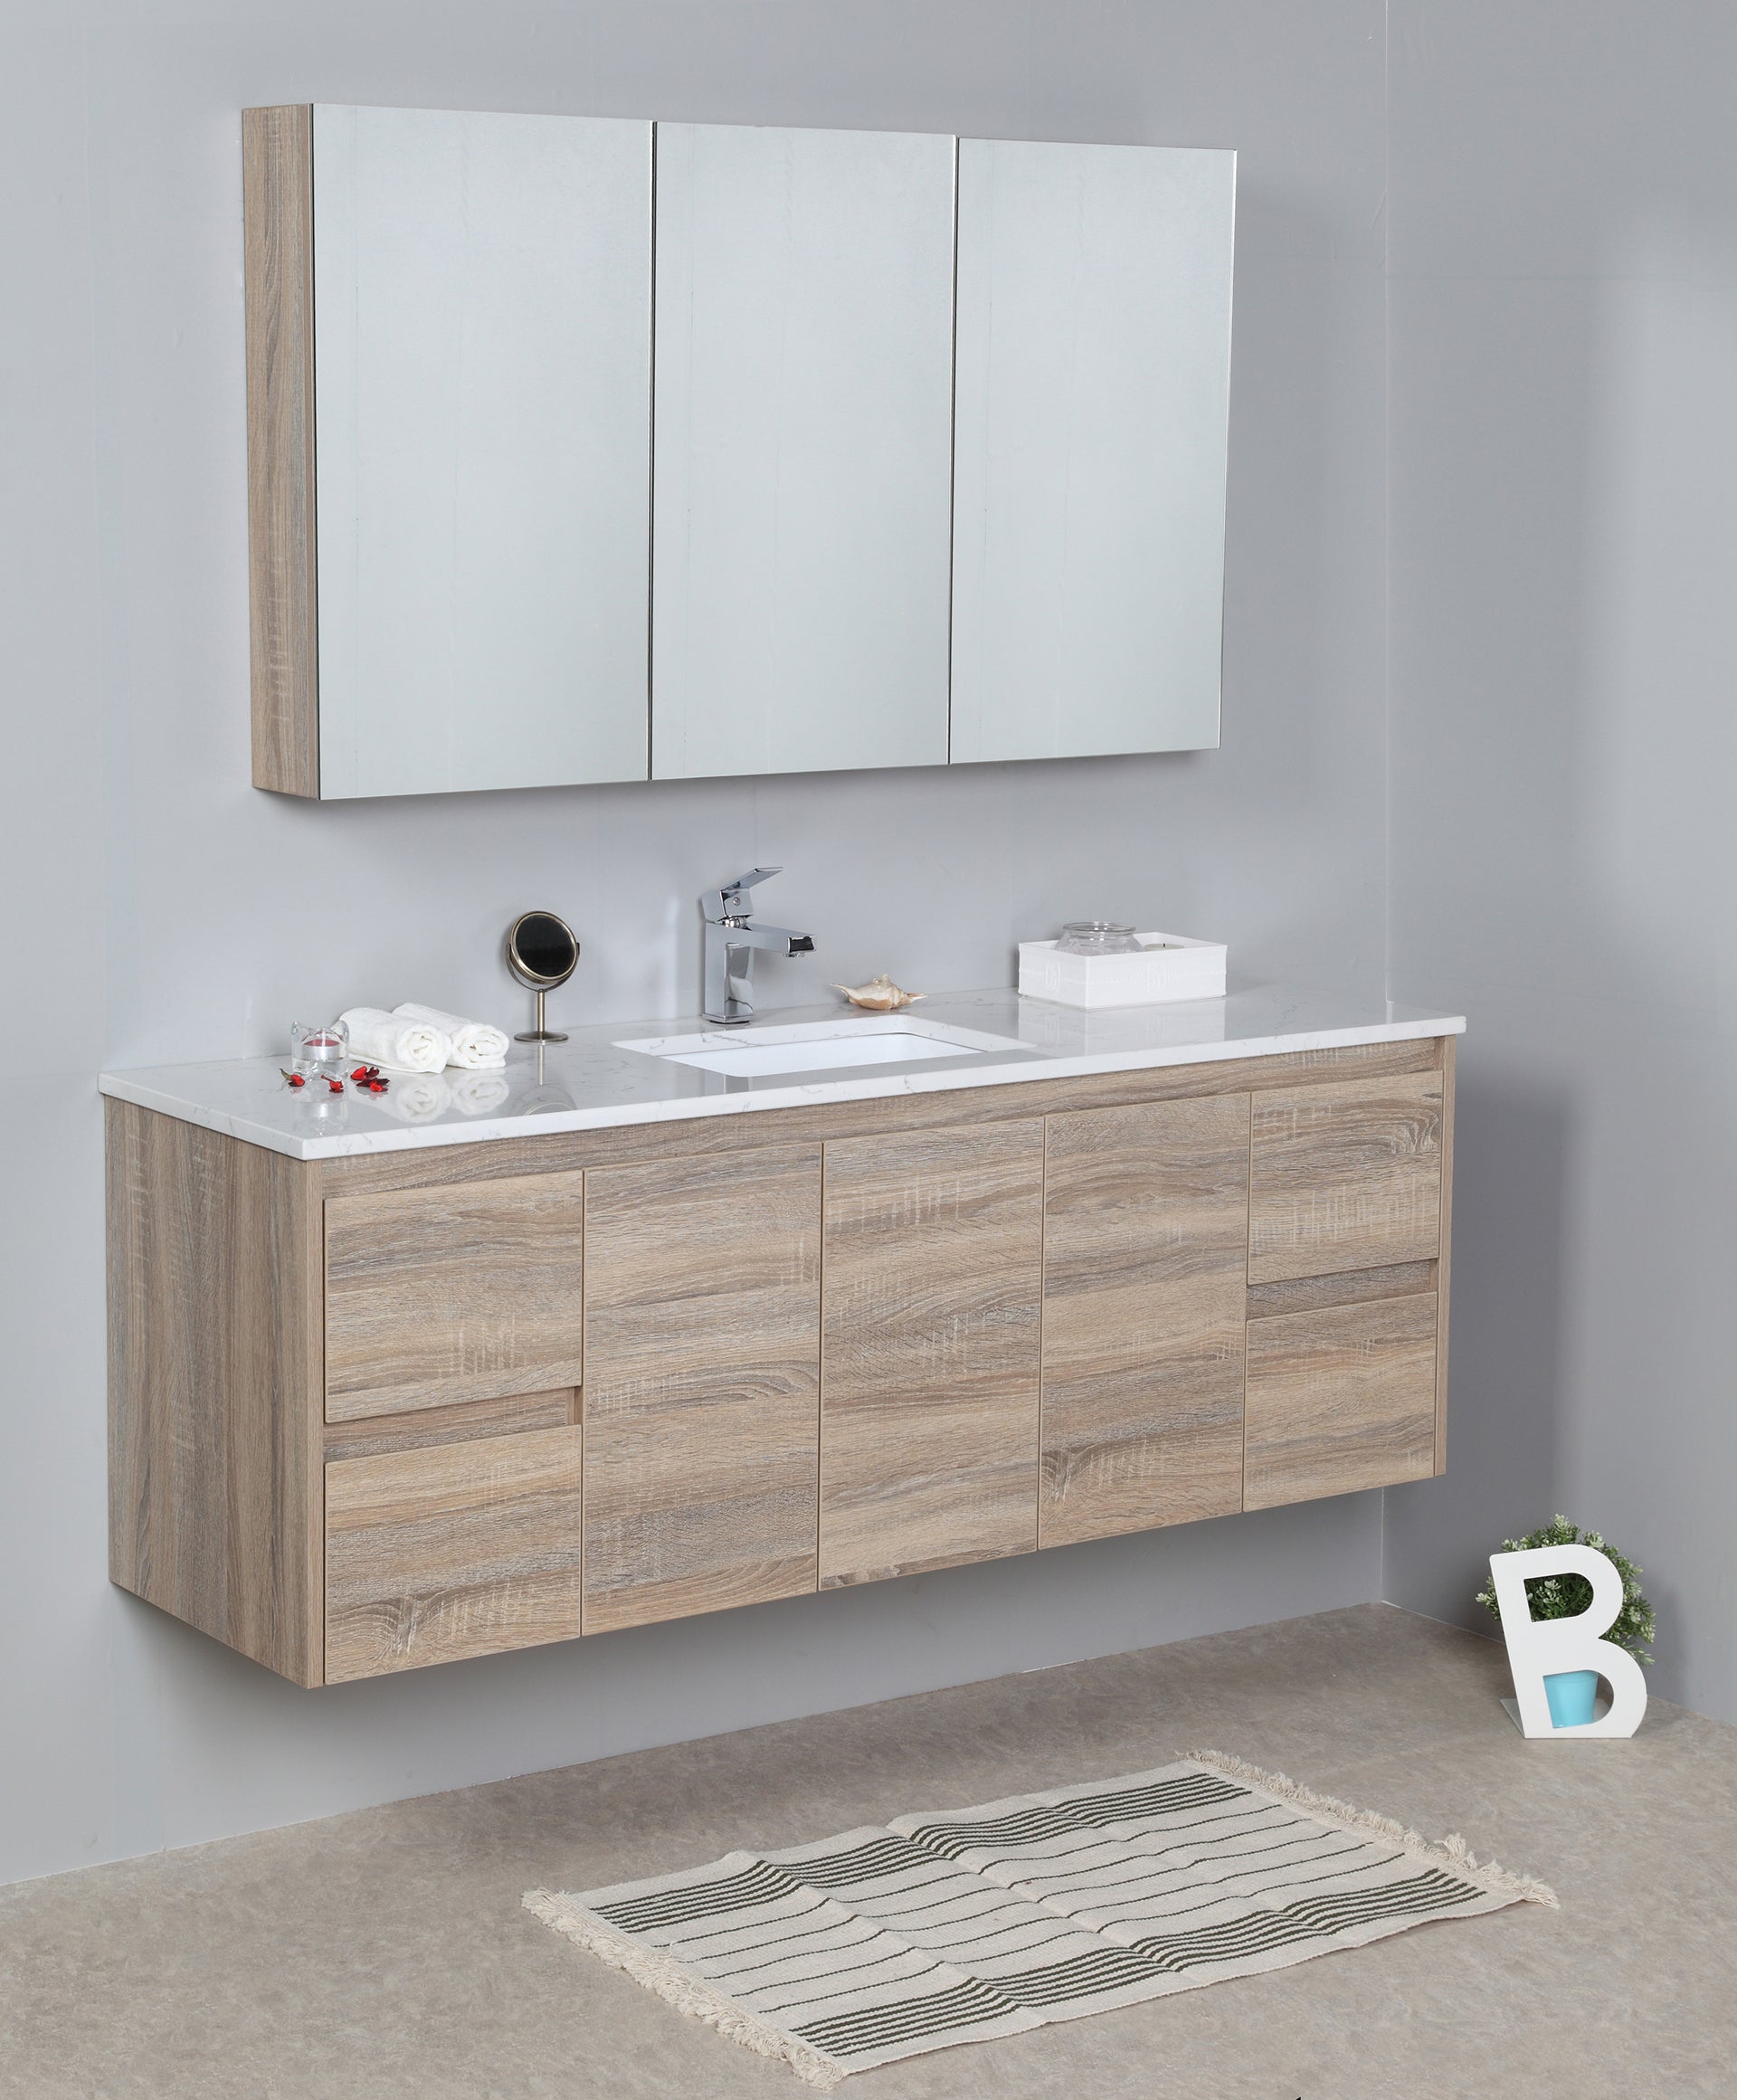 Grace 1500mm Wall Hung Timber look Bathroom Vanity - Single Or Double basin